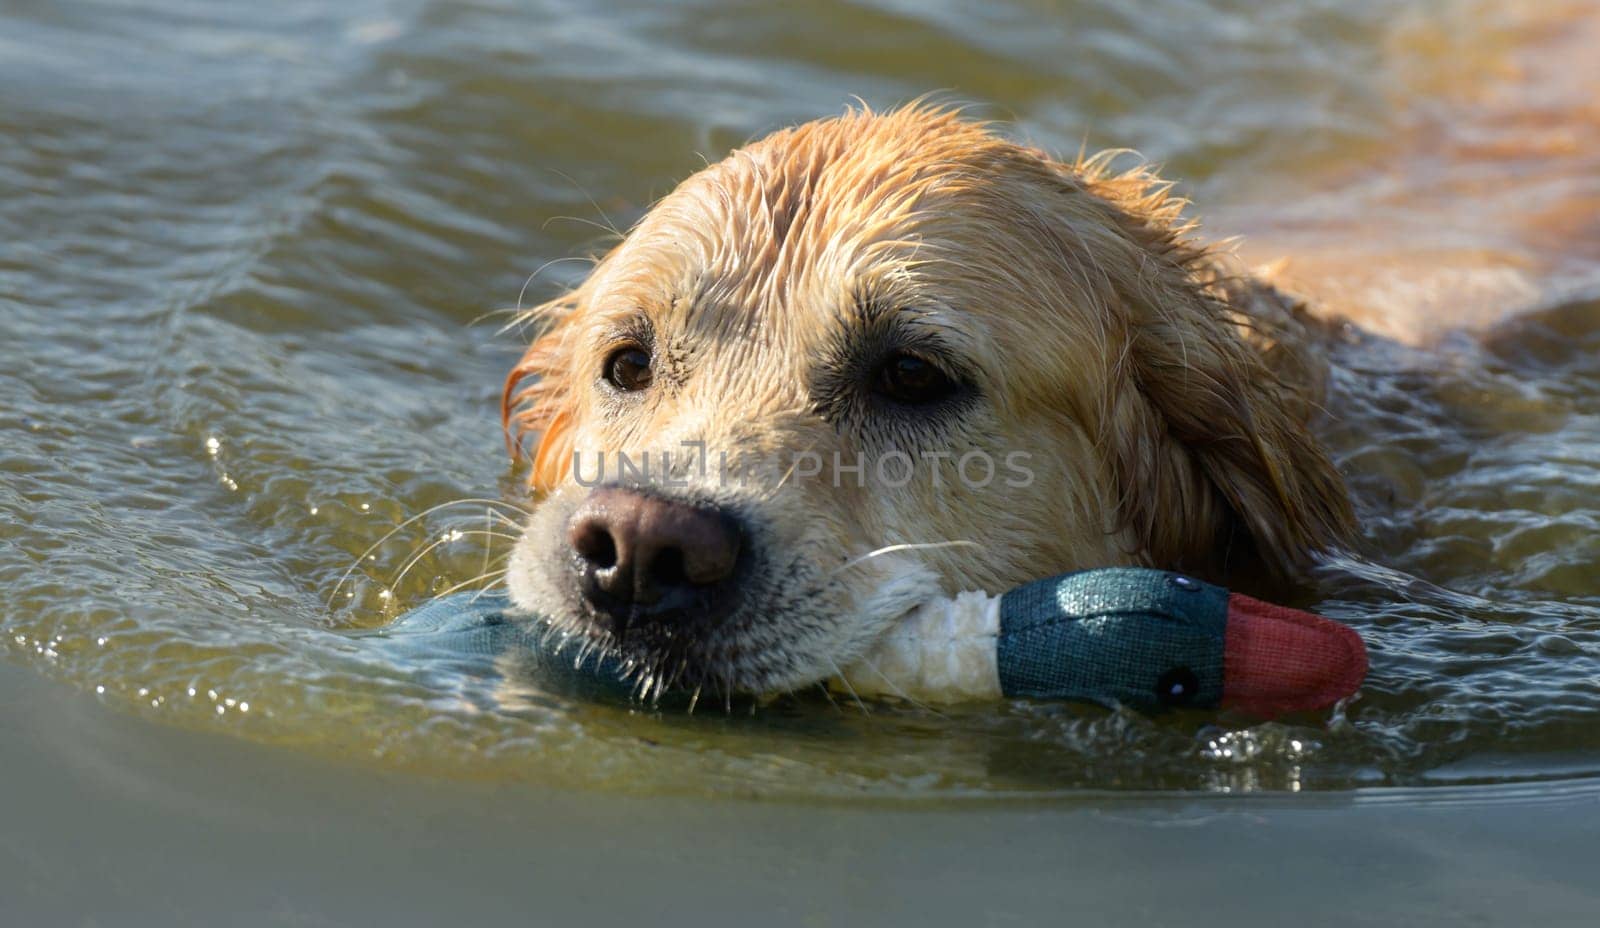 Golden Retriever Dog Holding Duck Toy And Swimming In River. Wet Labrador Doggy Pet In Lake Water With Rubber Bird